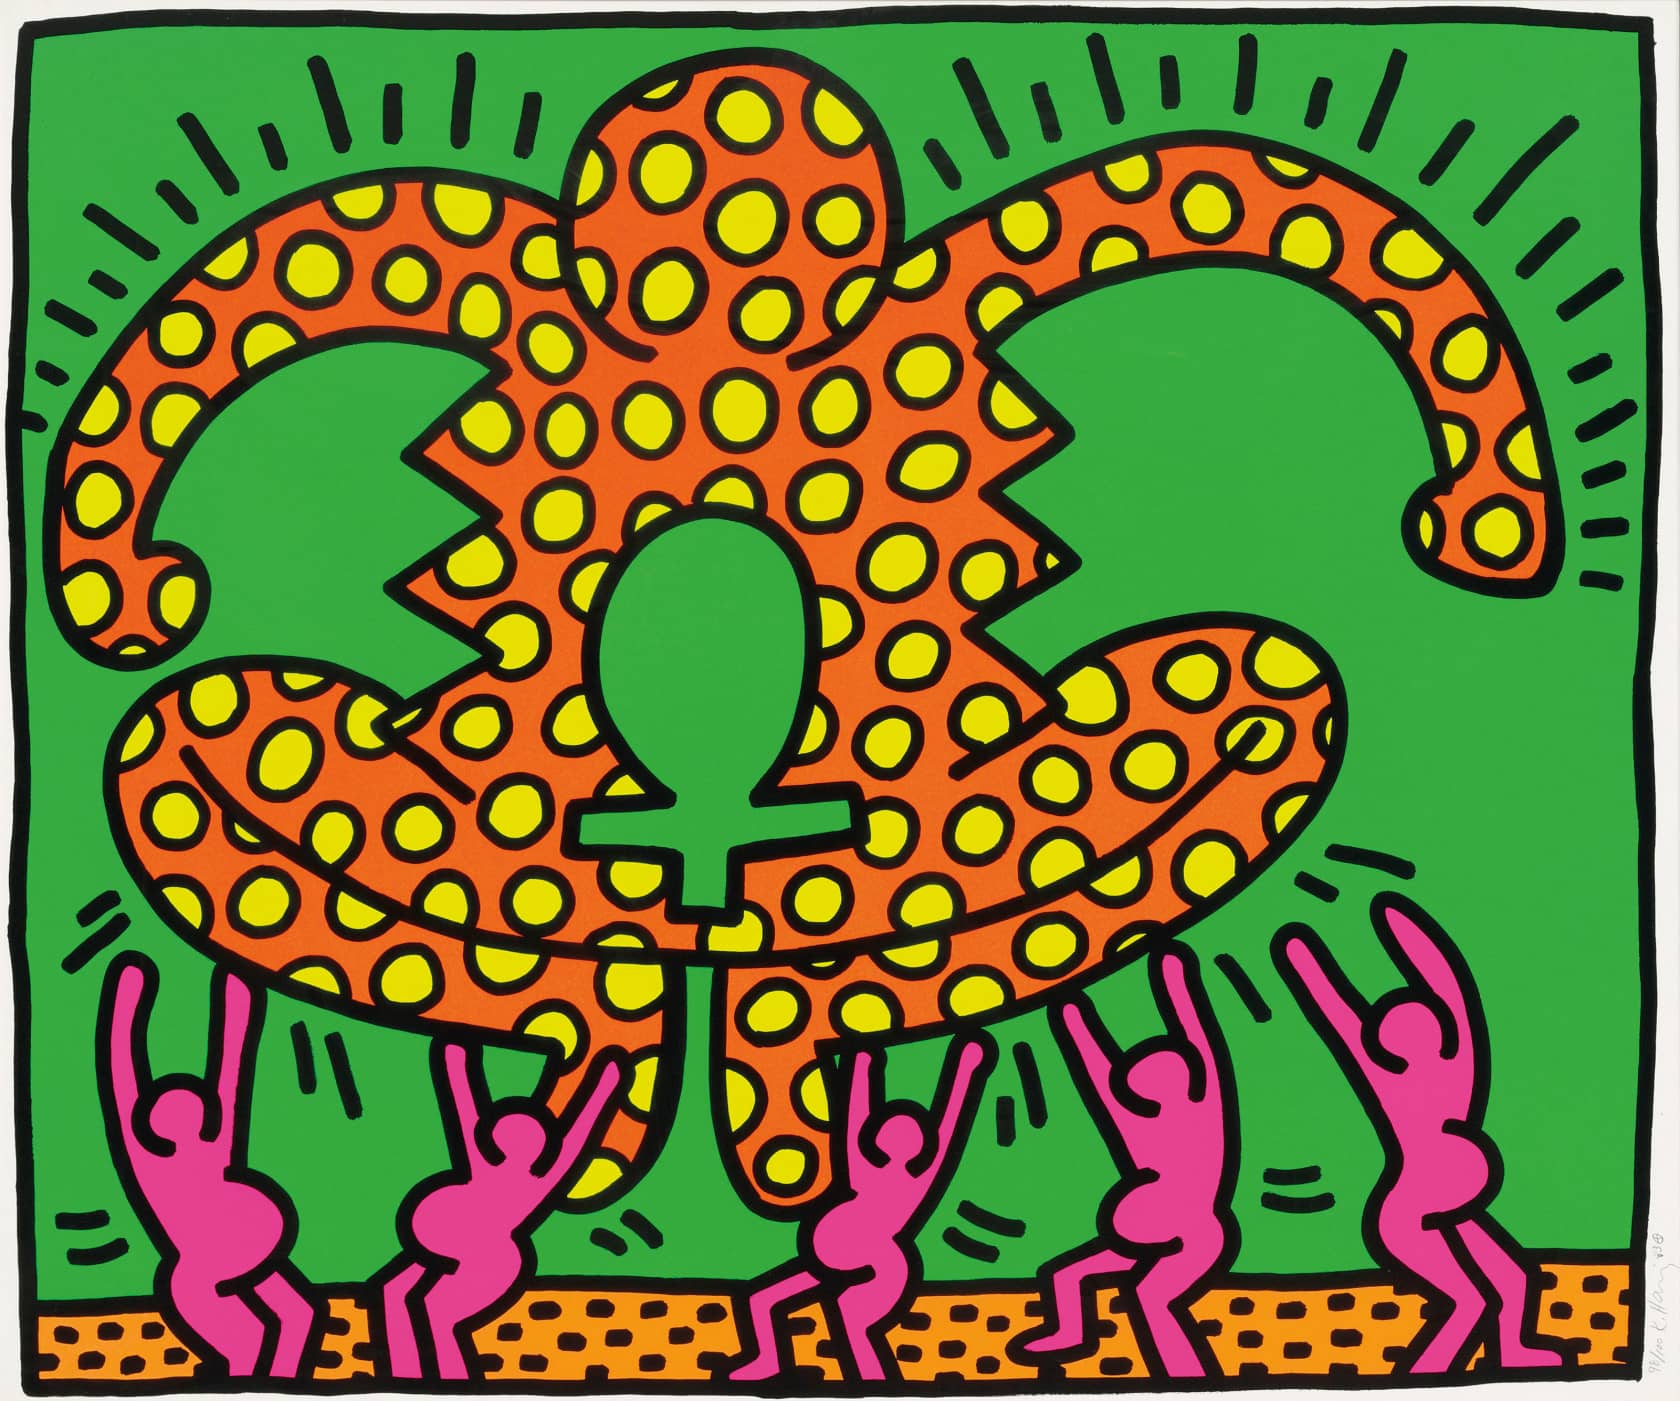 Keith Haring, Fertility Suite, Untitled 5 , 1983